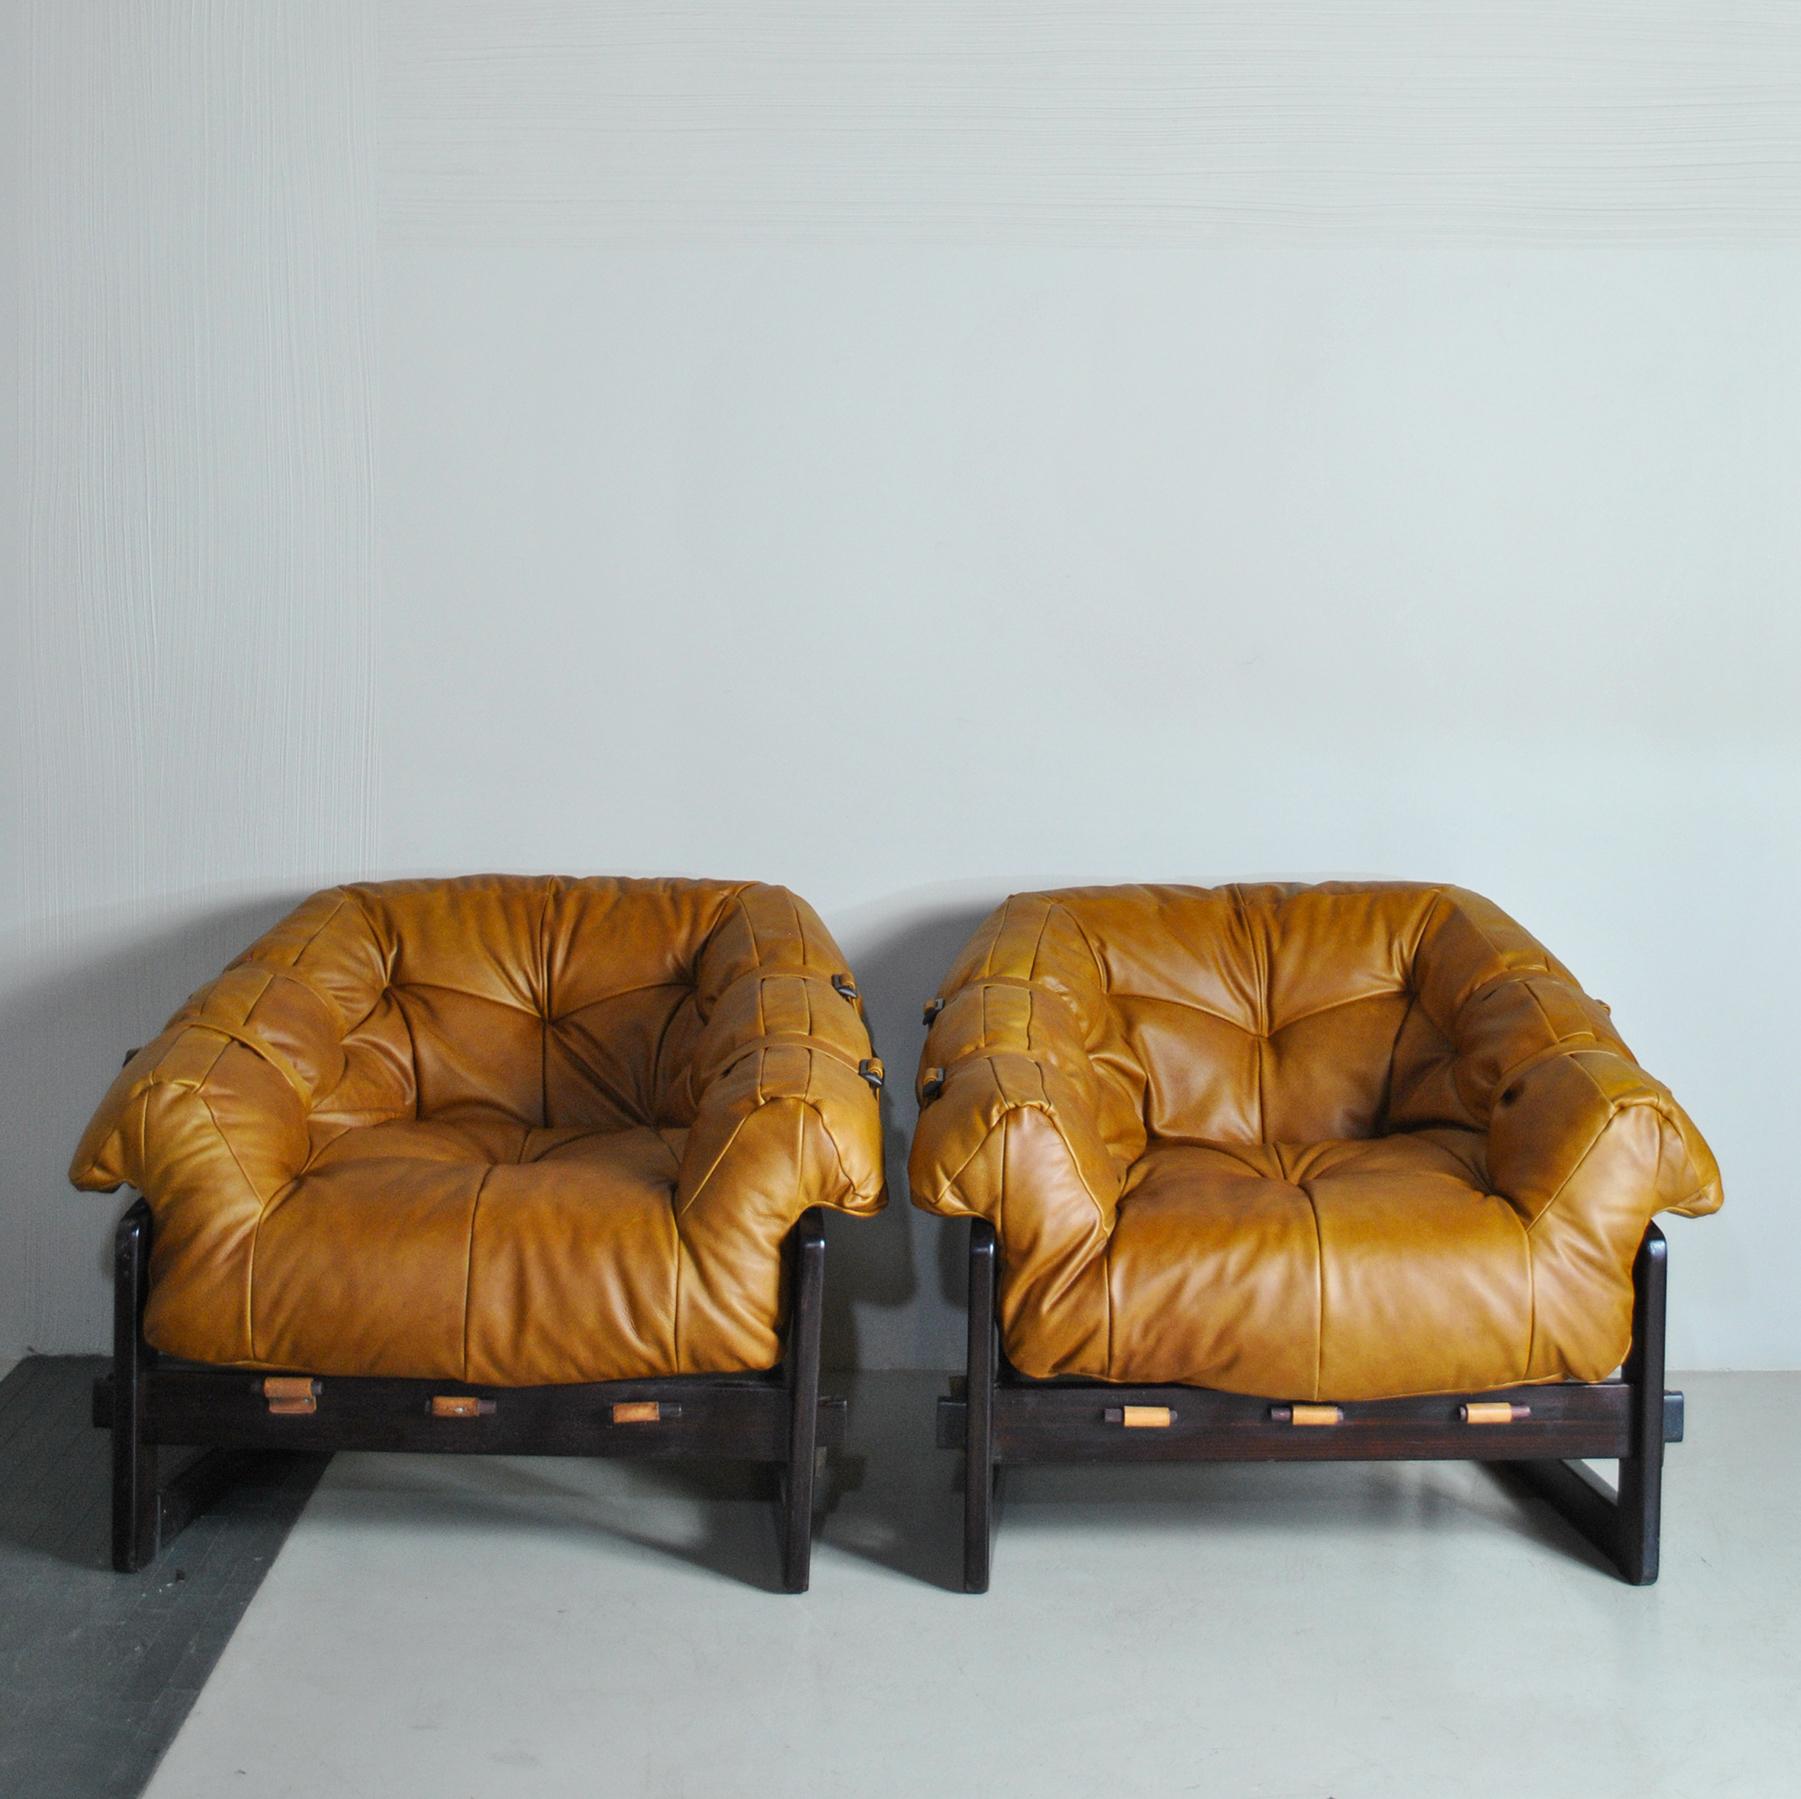 Percival Lafer Pair of Midcentury Brazilian Lounge Chair, 1960s 2